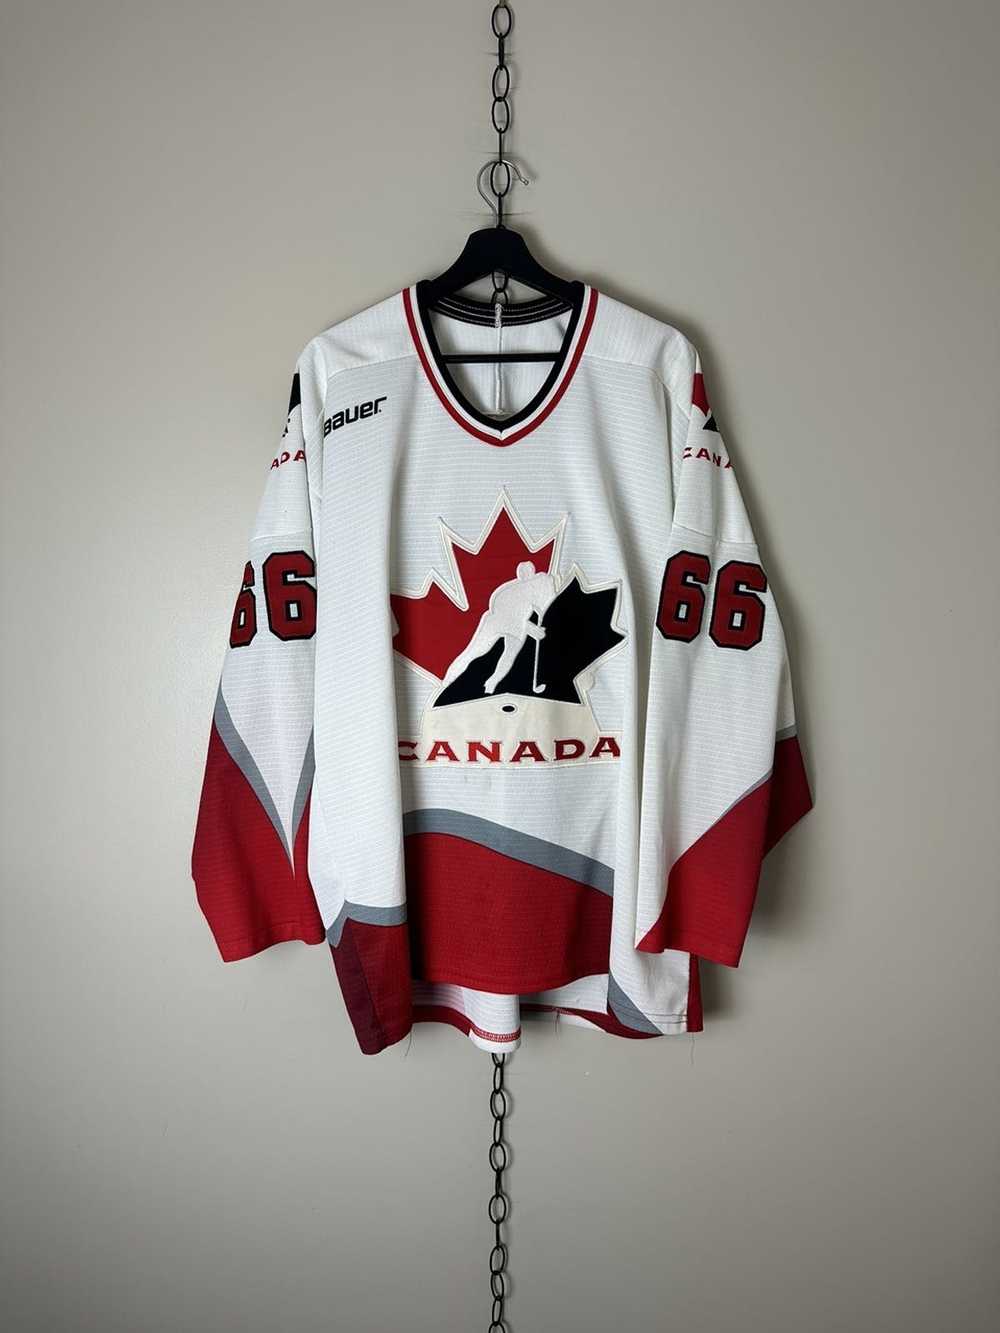 Nike Bauer Team Canada Hockey Jersey Home Red Long Sleeve Youth L